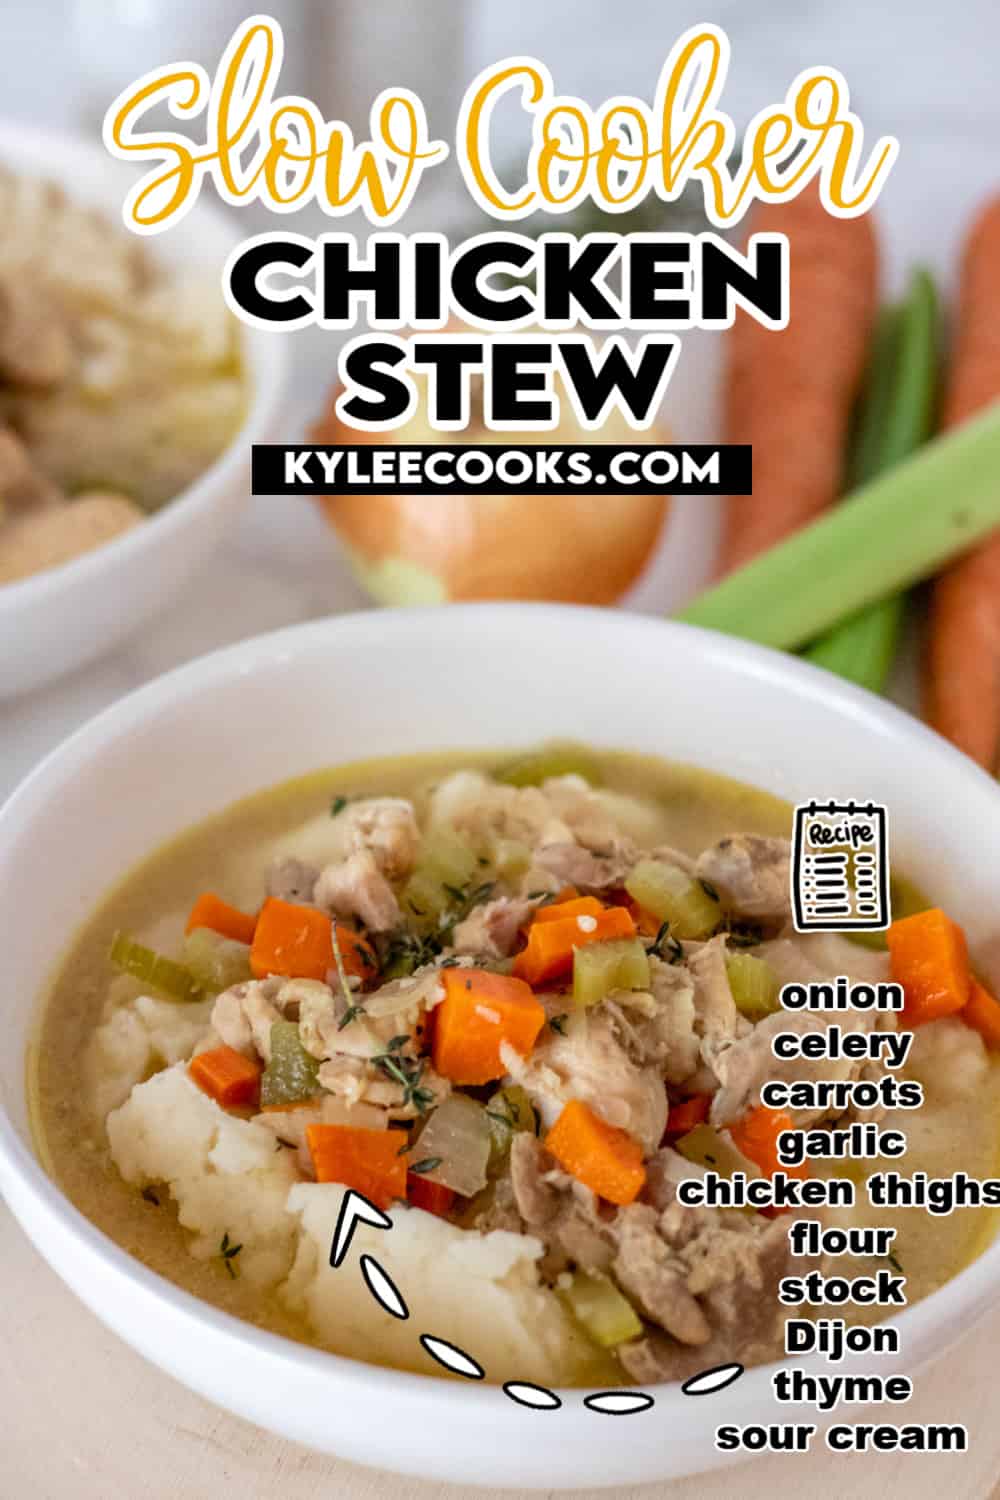 chicken stew in a white bowl with recipe name and ingredients overlaid in text.